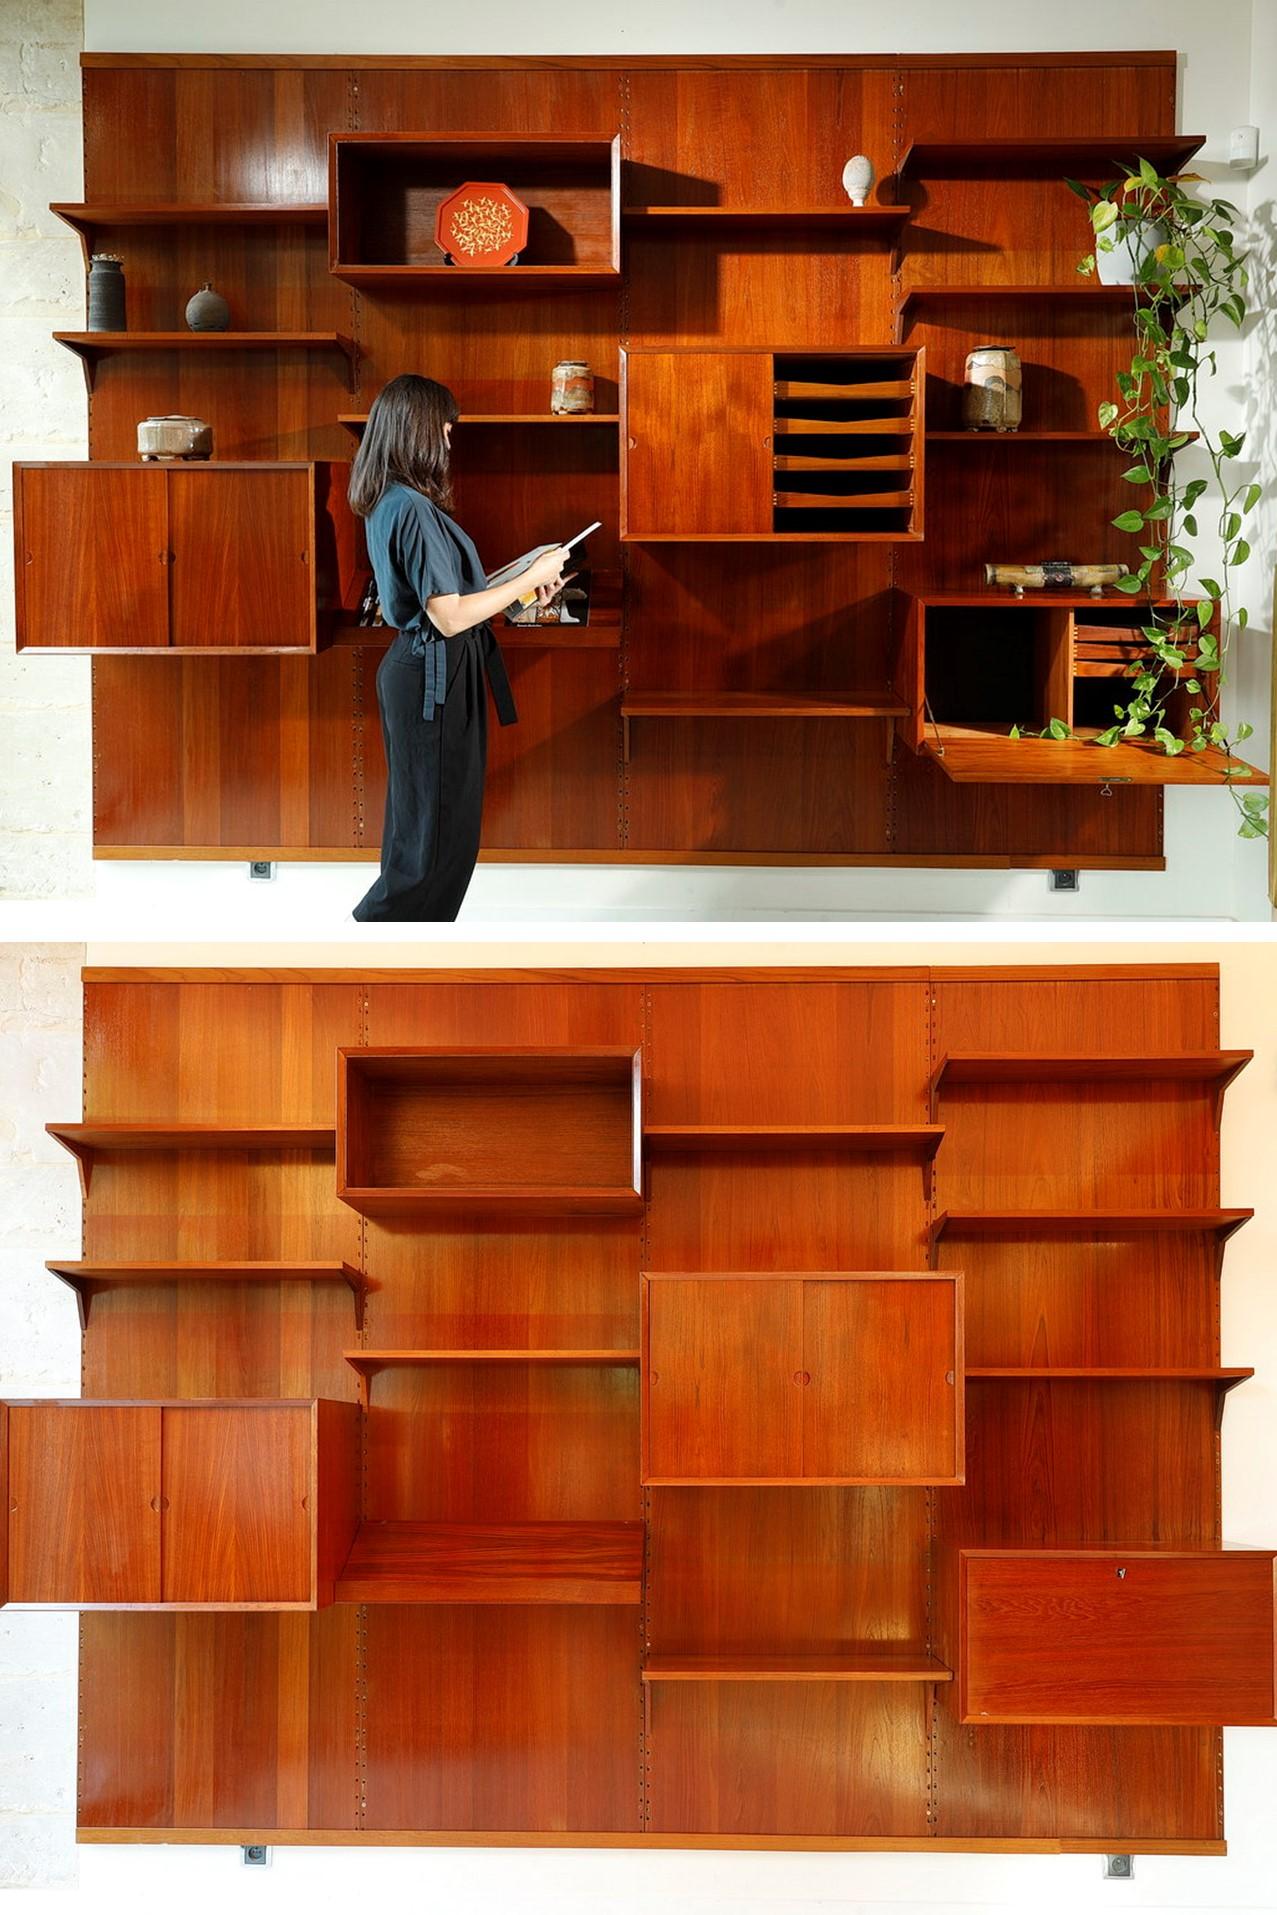 Cadovius teak furniture composed of four panels (H: 241cm, L: 80cm x 4). This wall unit made by Poul Cadovius, Scandinavian designer of the 1960s, includes several shelves and boxes:

- 7 small shelves (W: 80 cm x D: 22 cm) and 1 large shelf (W: